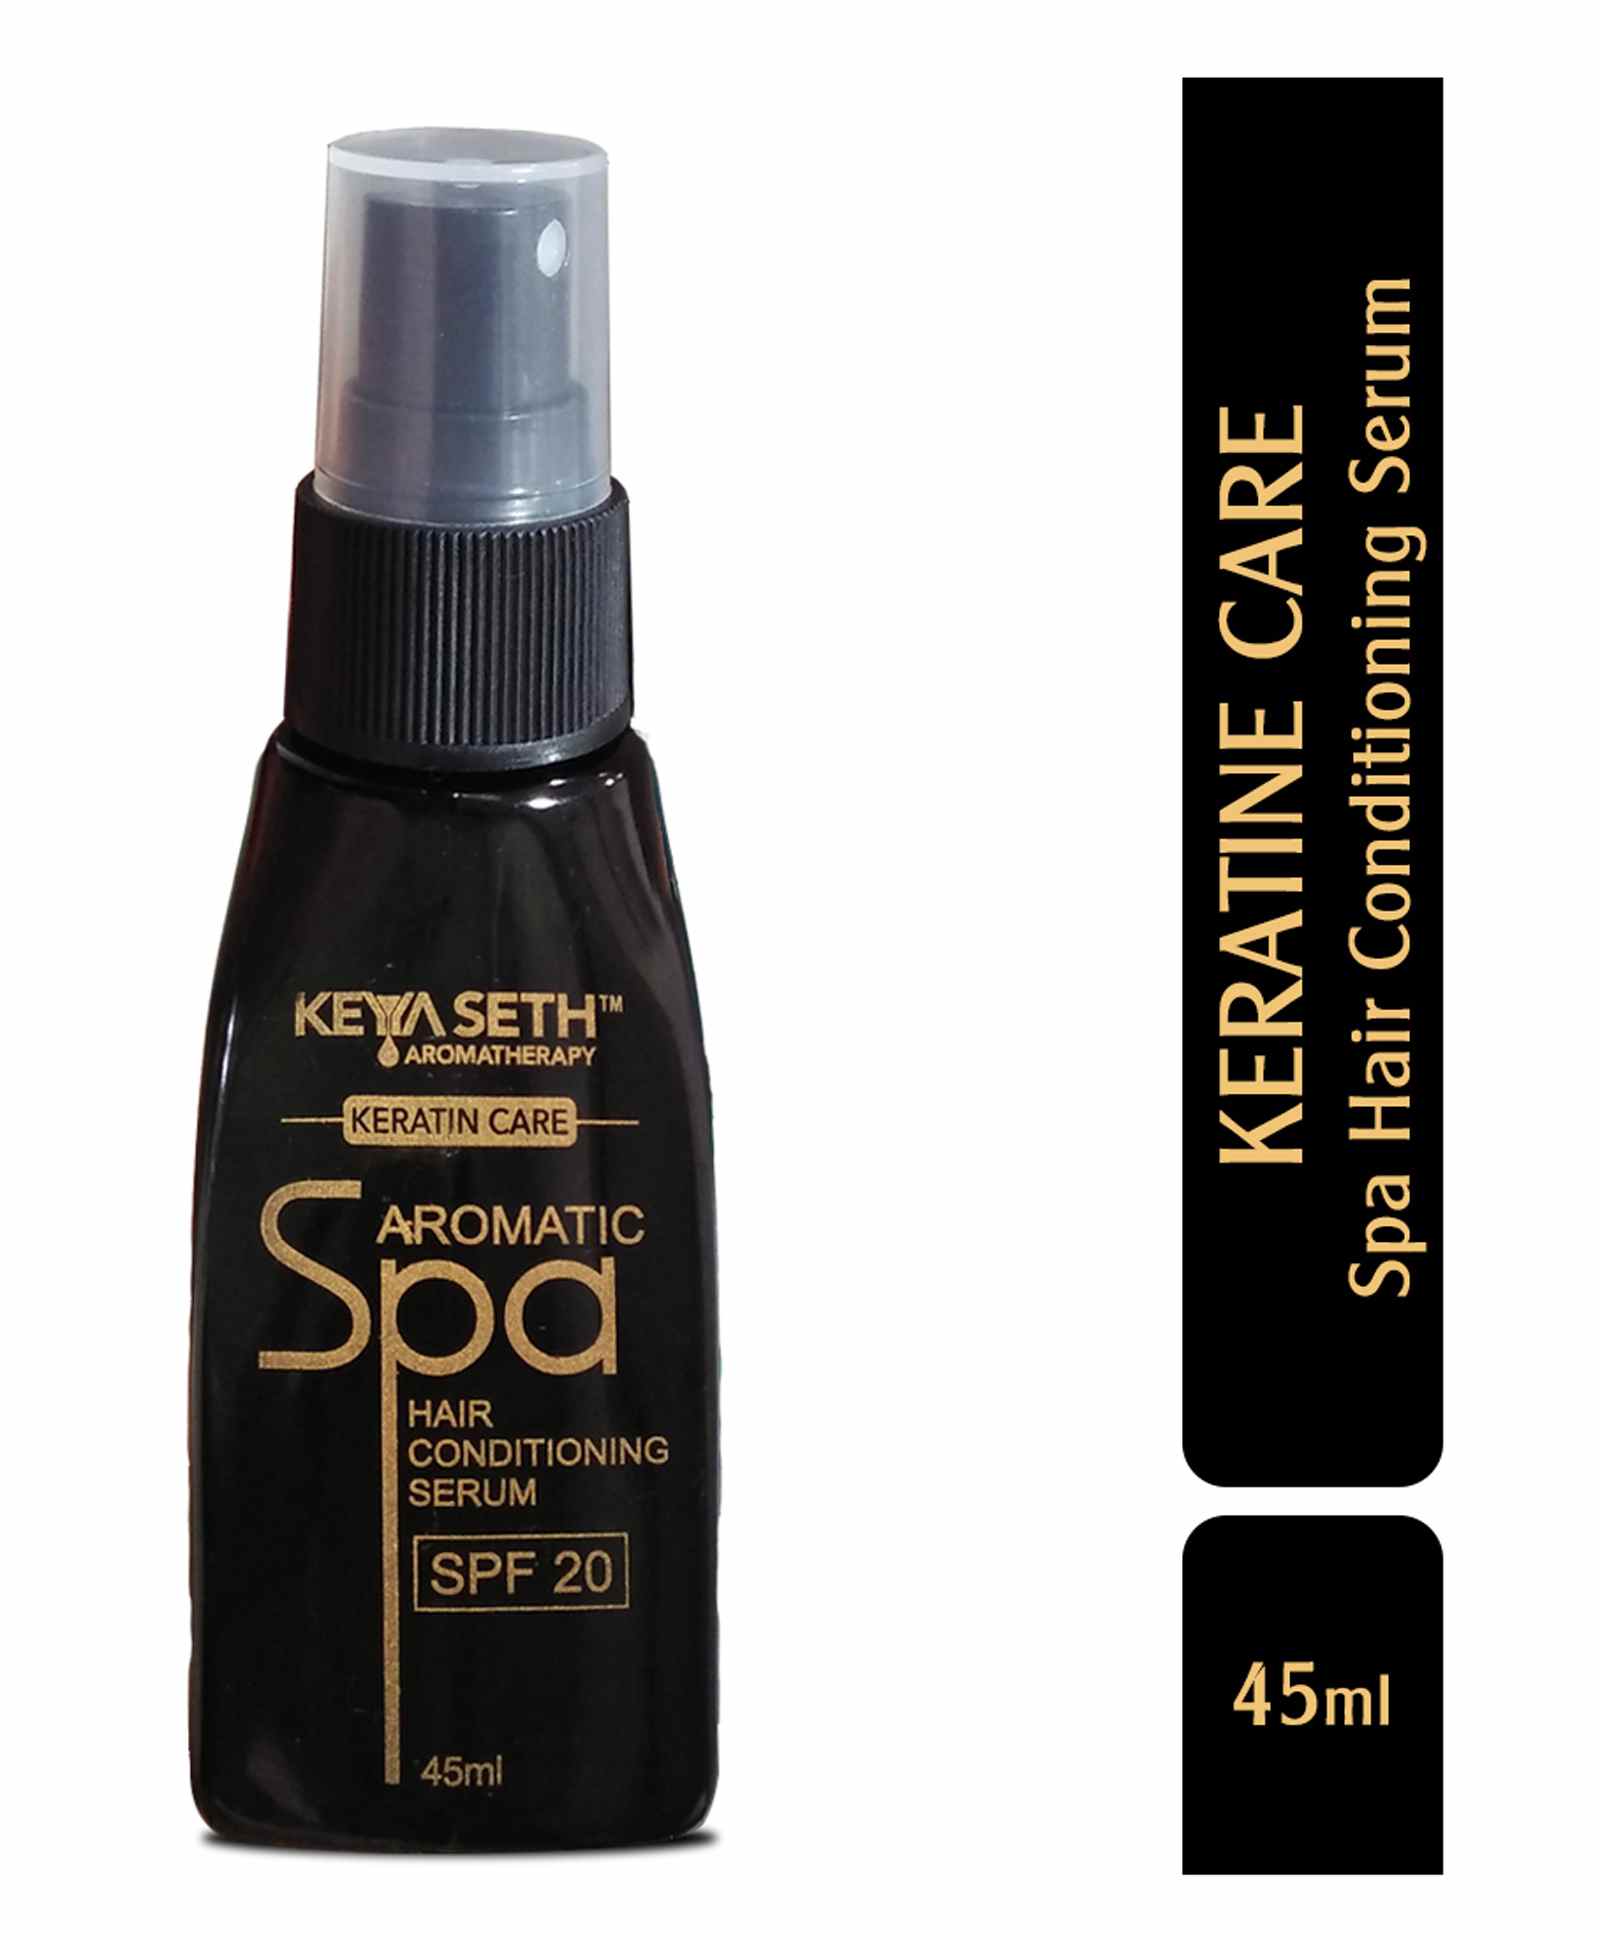 Keya Seth Aromatherapy Spa Hair Conditioning Serum with Keratin Care SPF 20  - 45 ml Online in India, Buy at Best Price from  - 9277034